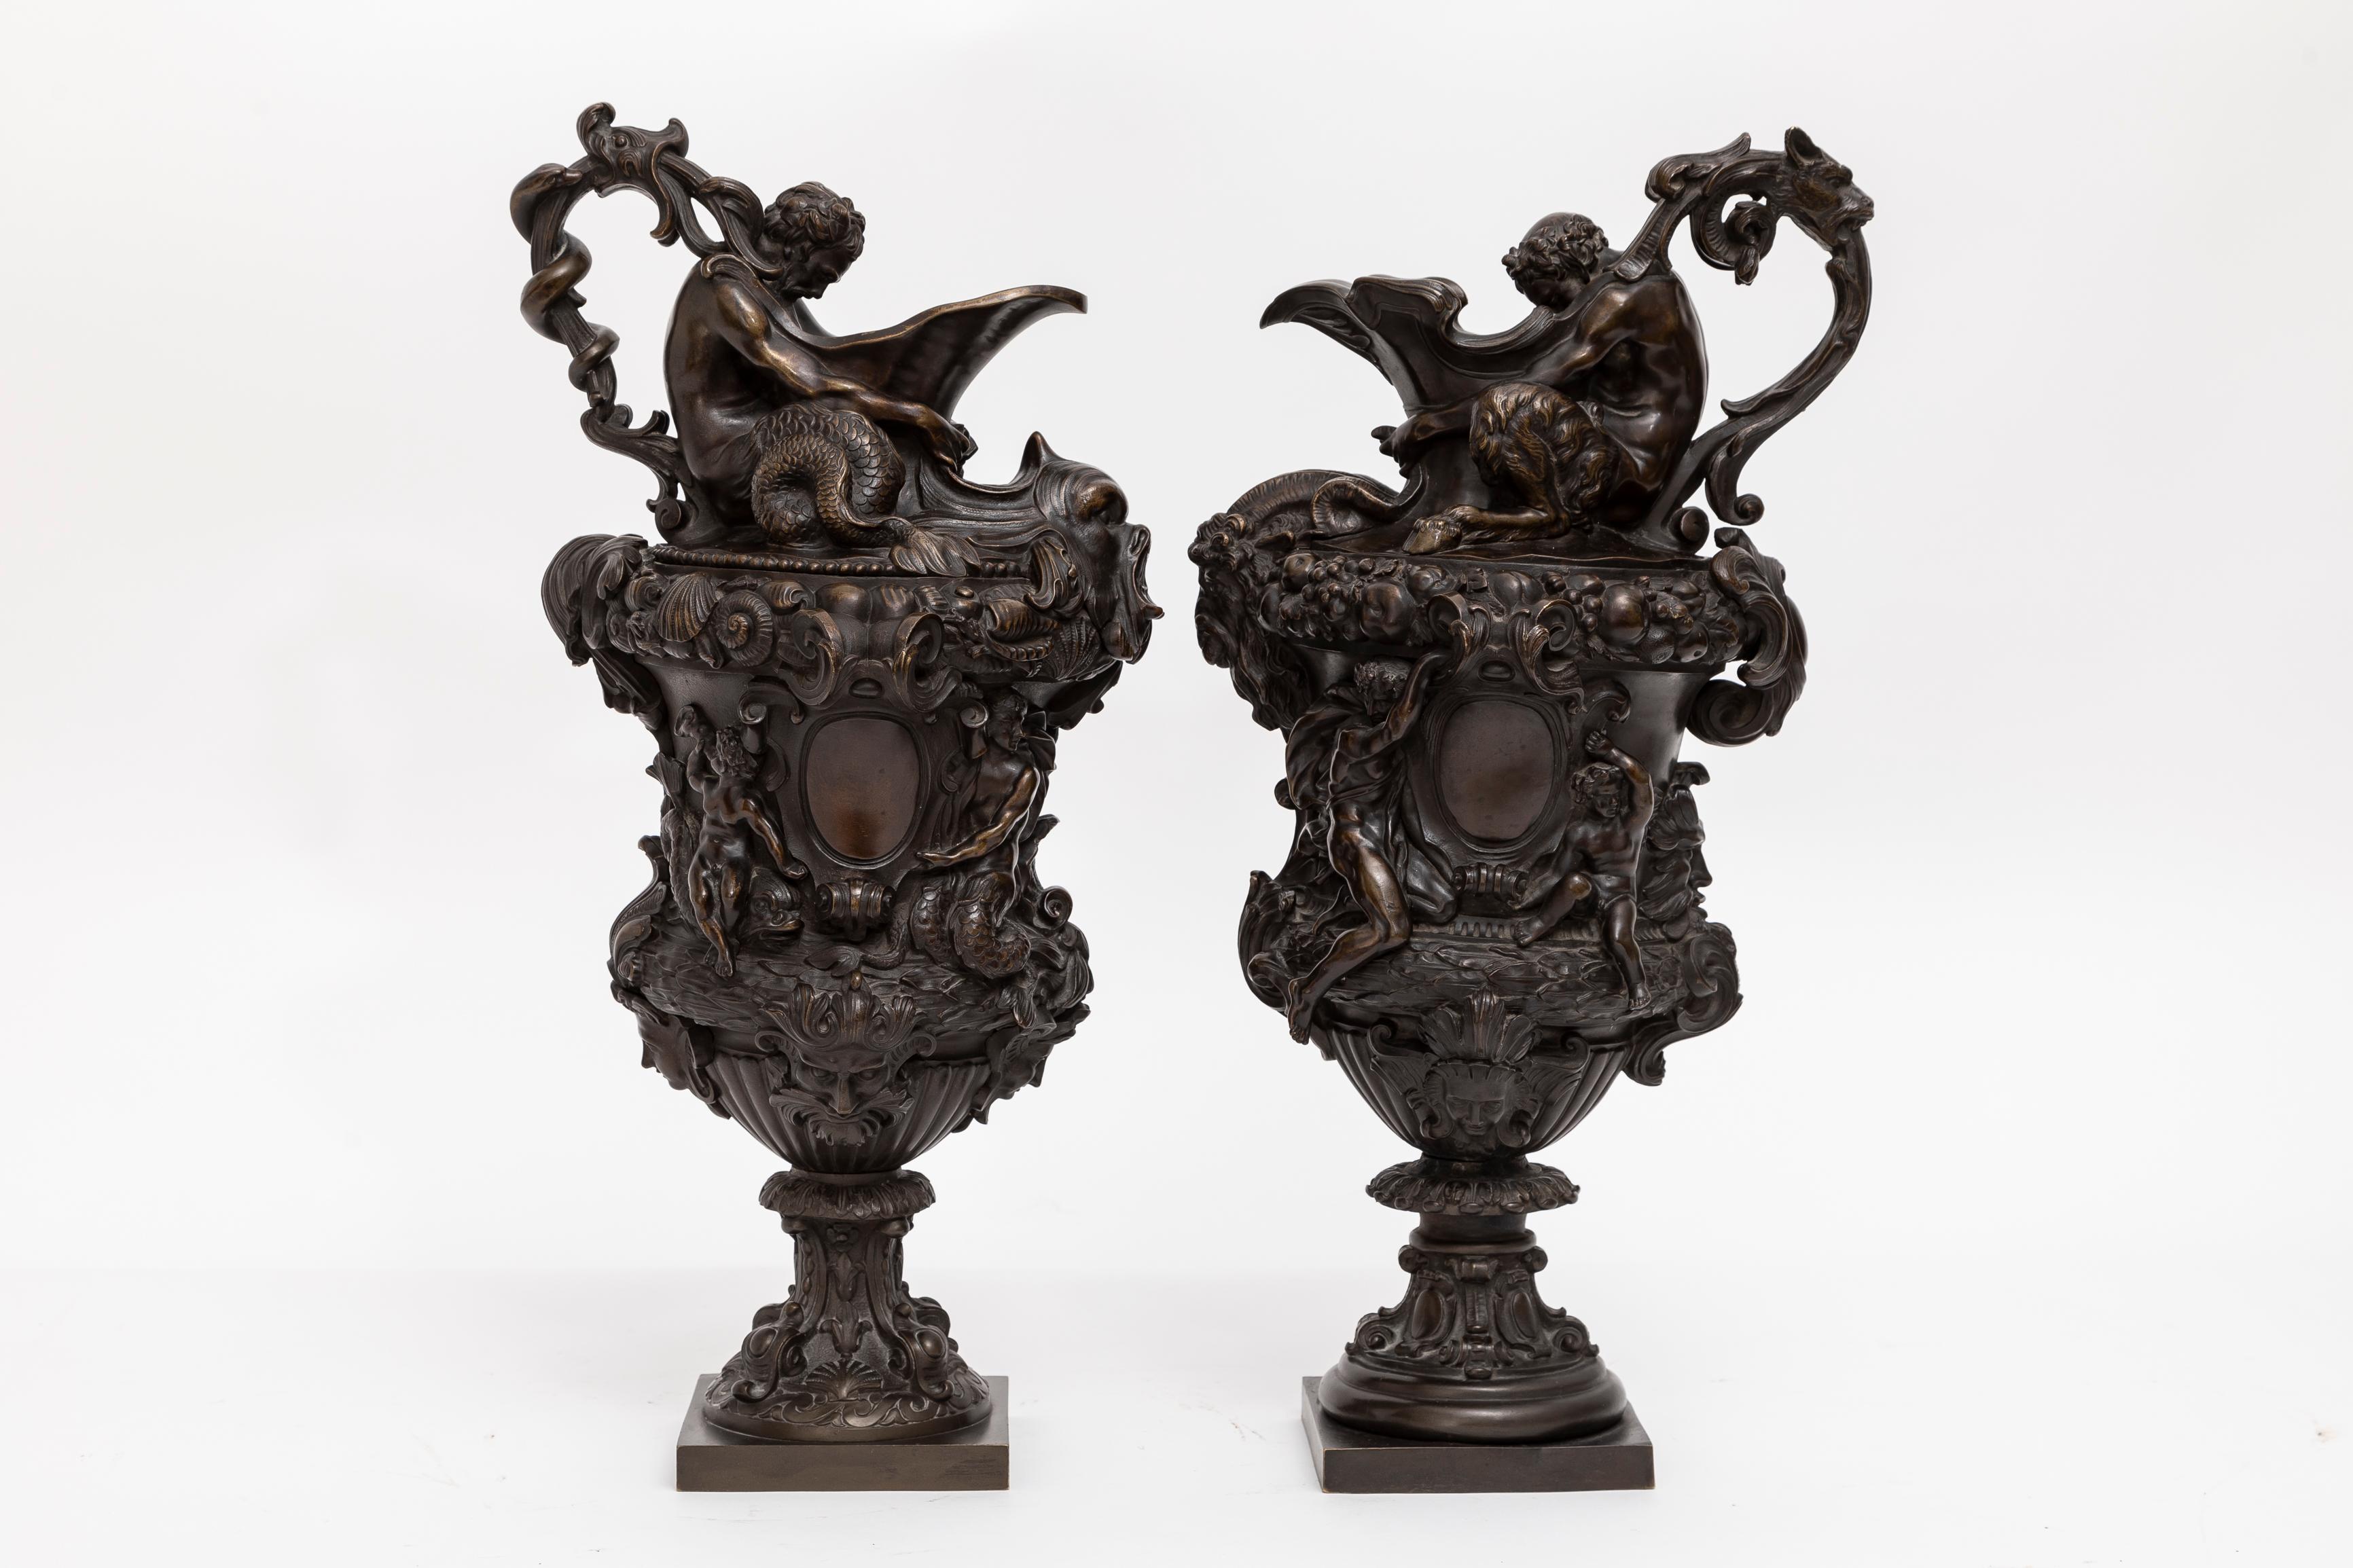 A Fabulous Pair of Antique 19th Century French Patinated Bronze Ewers Emblematic of Water & Earth.  These are a popular and well-known model of ewers named 